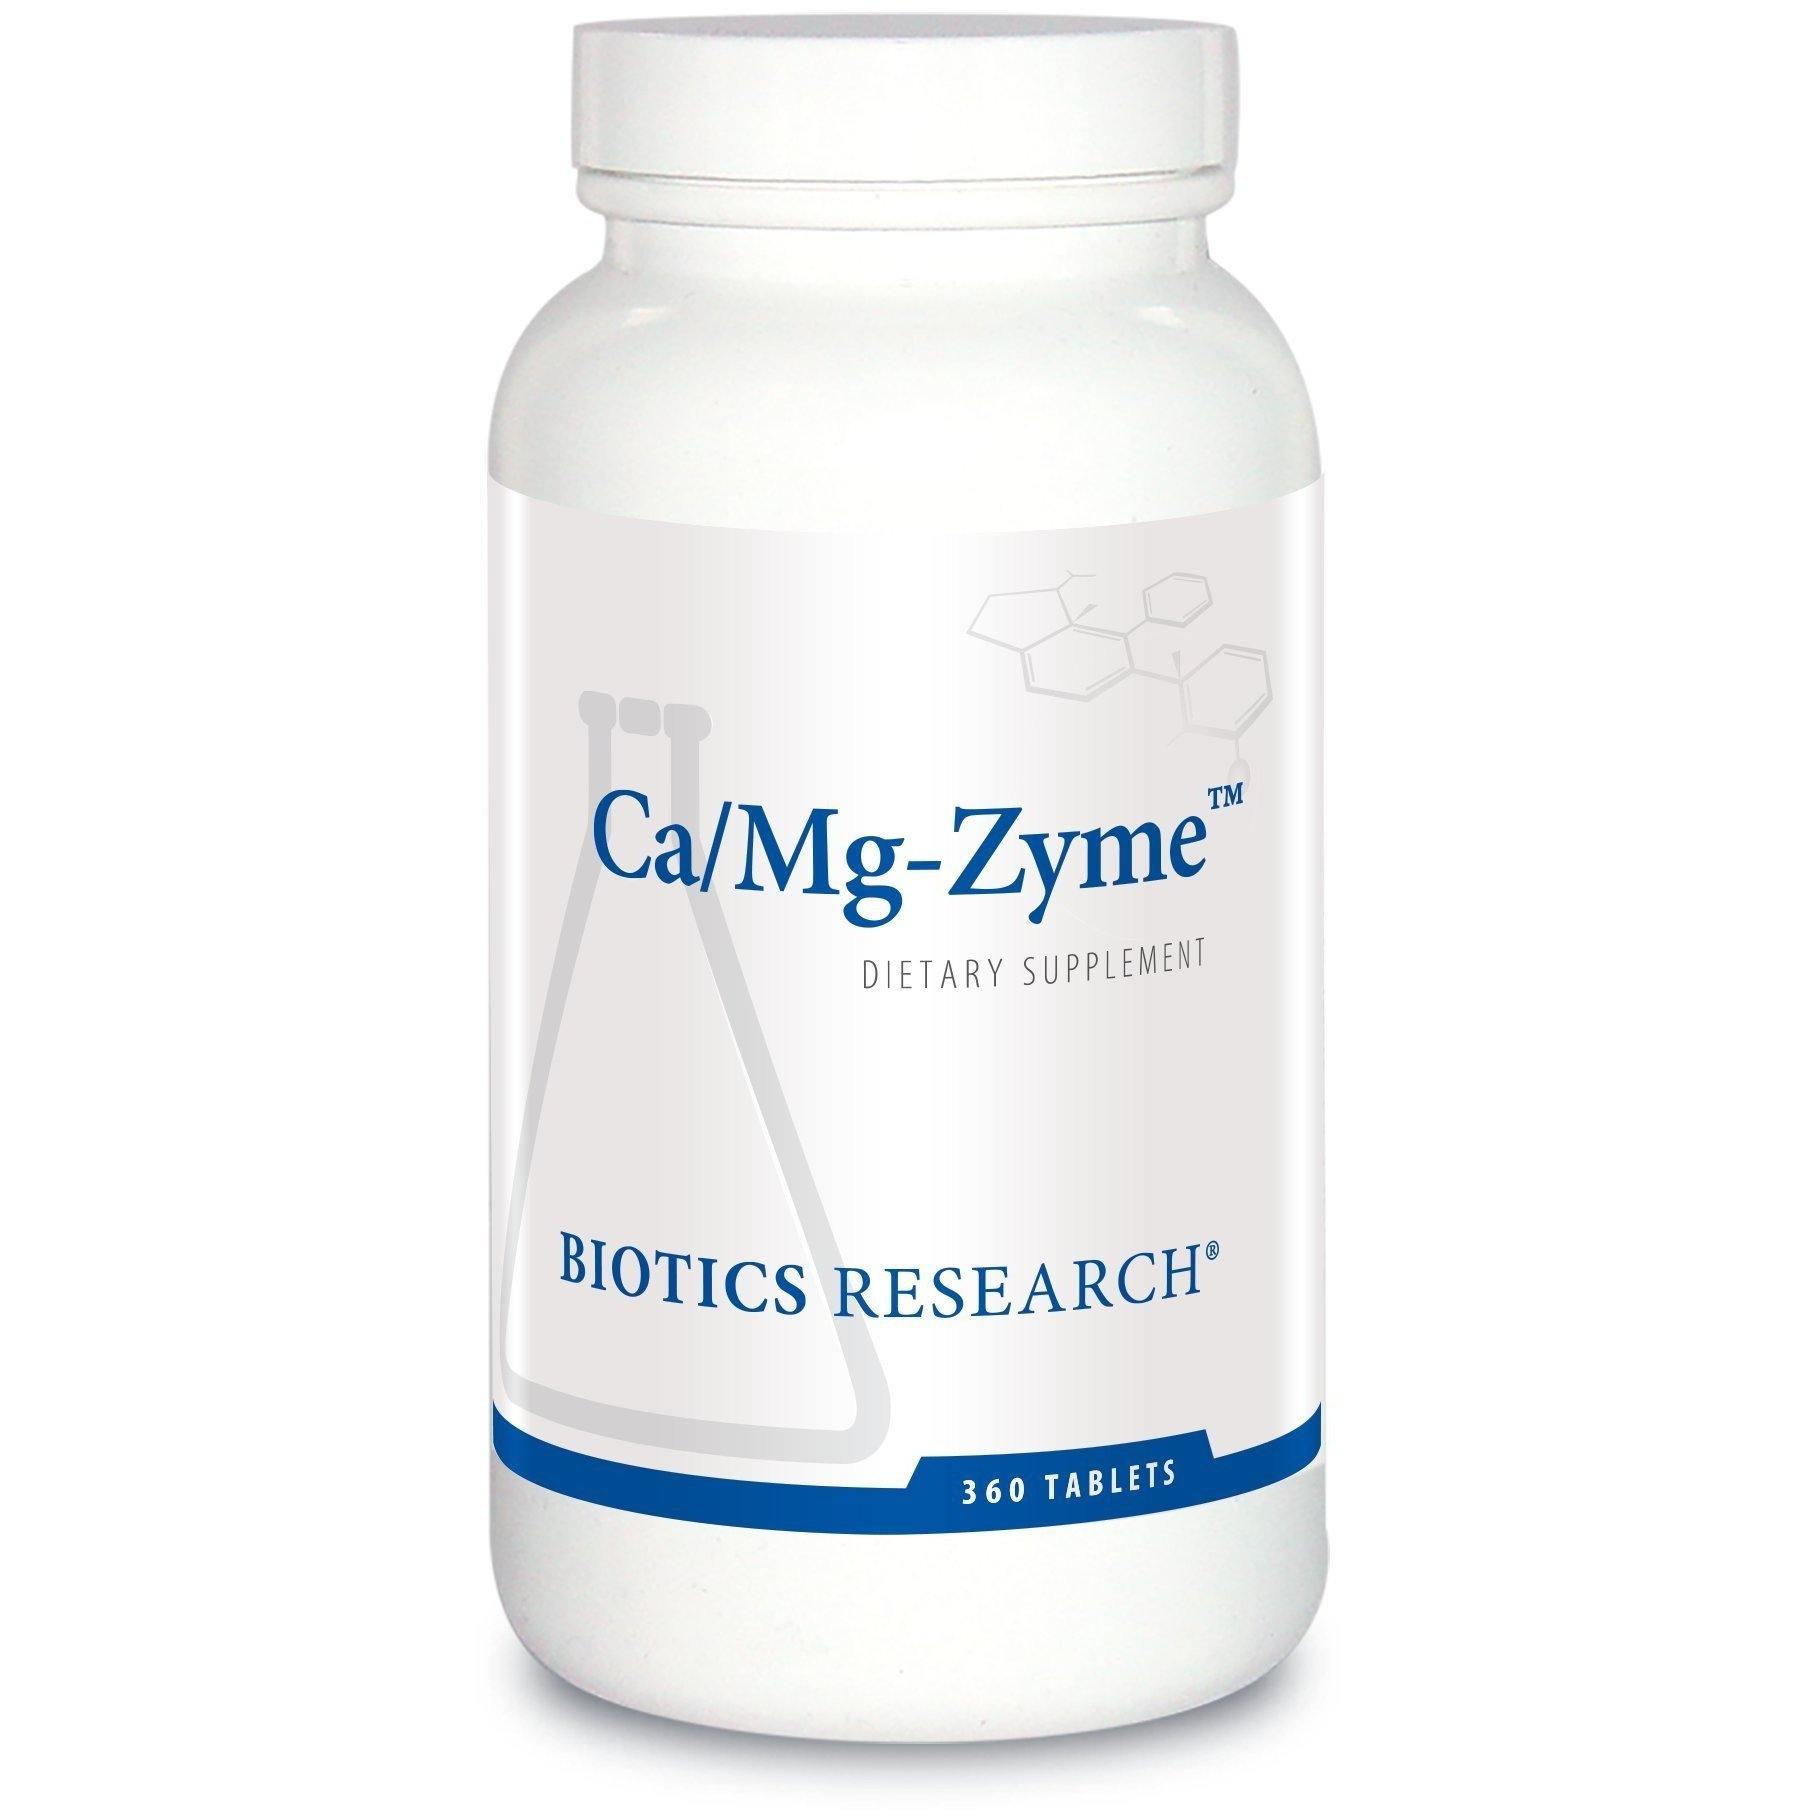 Biotics Research Ca/Mg-Zyme 360 Tablets